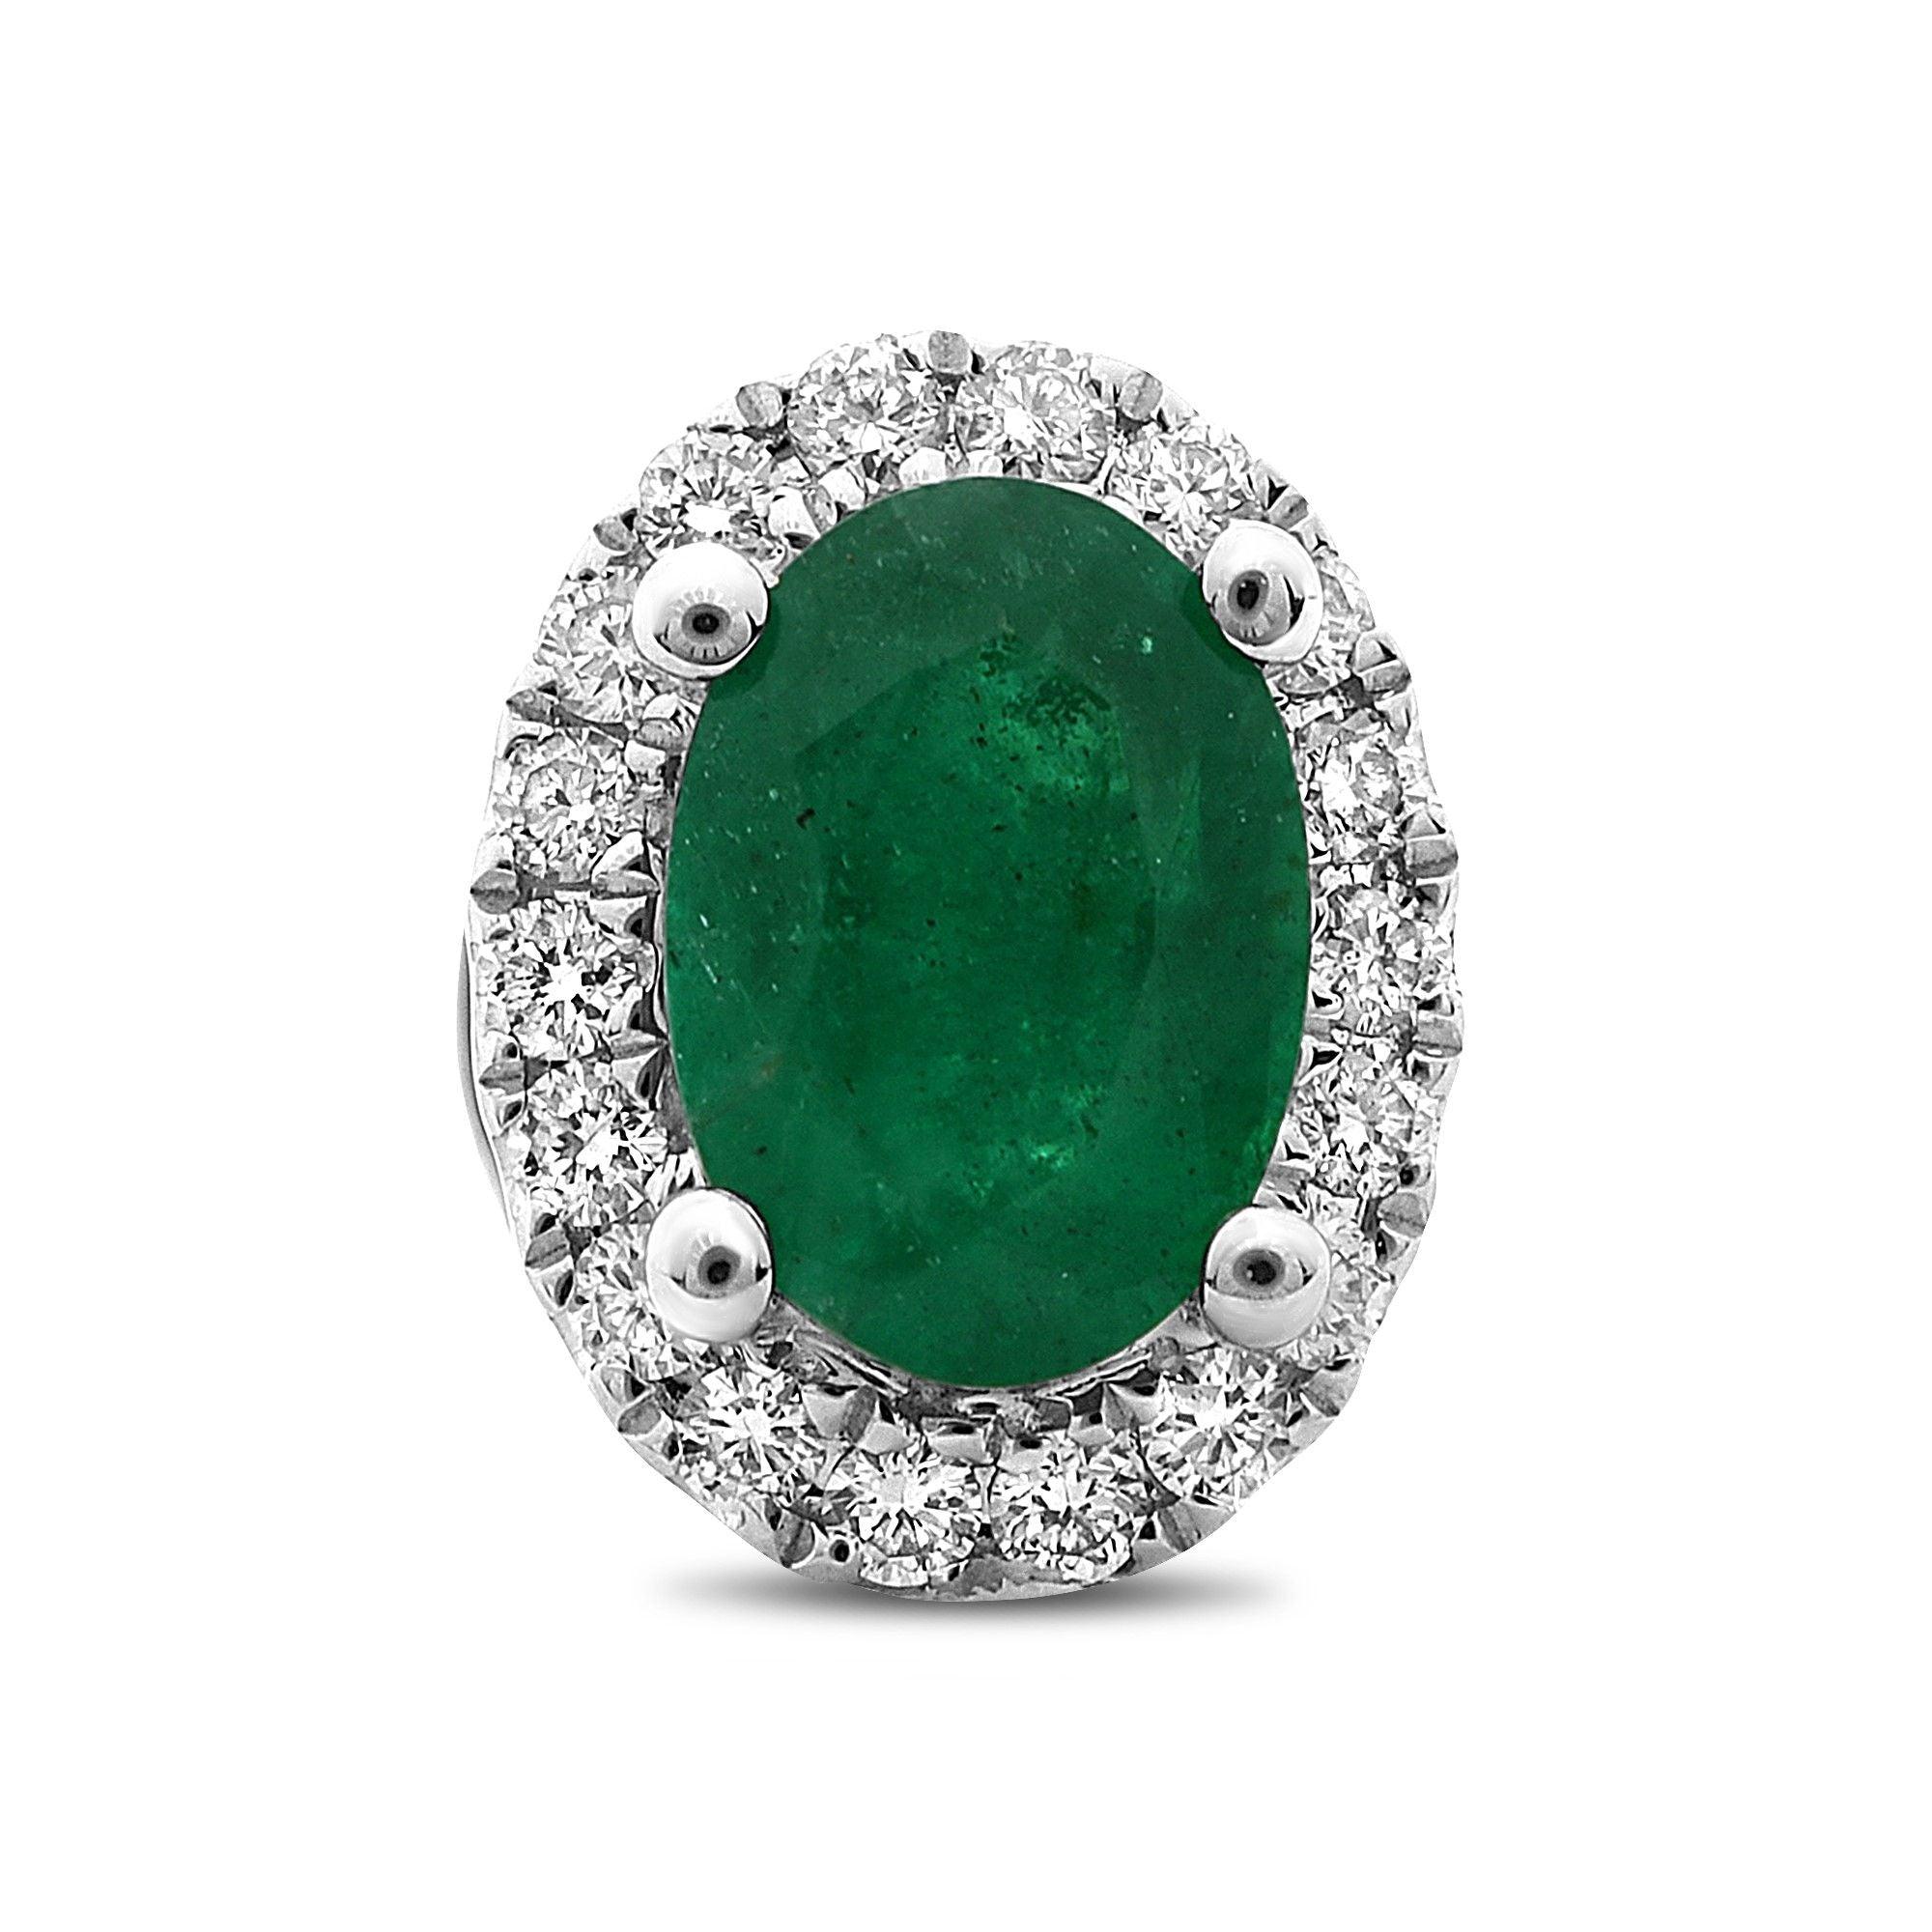 At the center of these eye-catching 18 karat white gold stud earrings rest 0.95 carats of brilliant oval cut emeralds. A sparkling halo of white diamonds surrounds each center stone with a total weight of 0.16 carats of round cut white diamonds